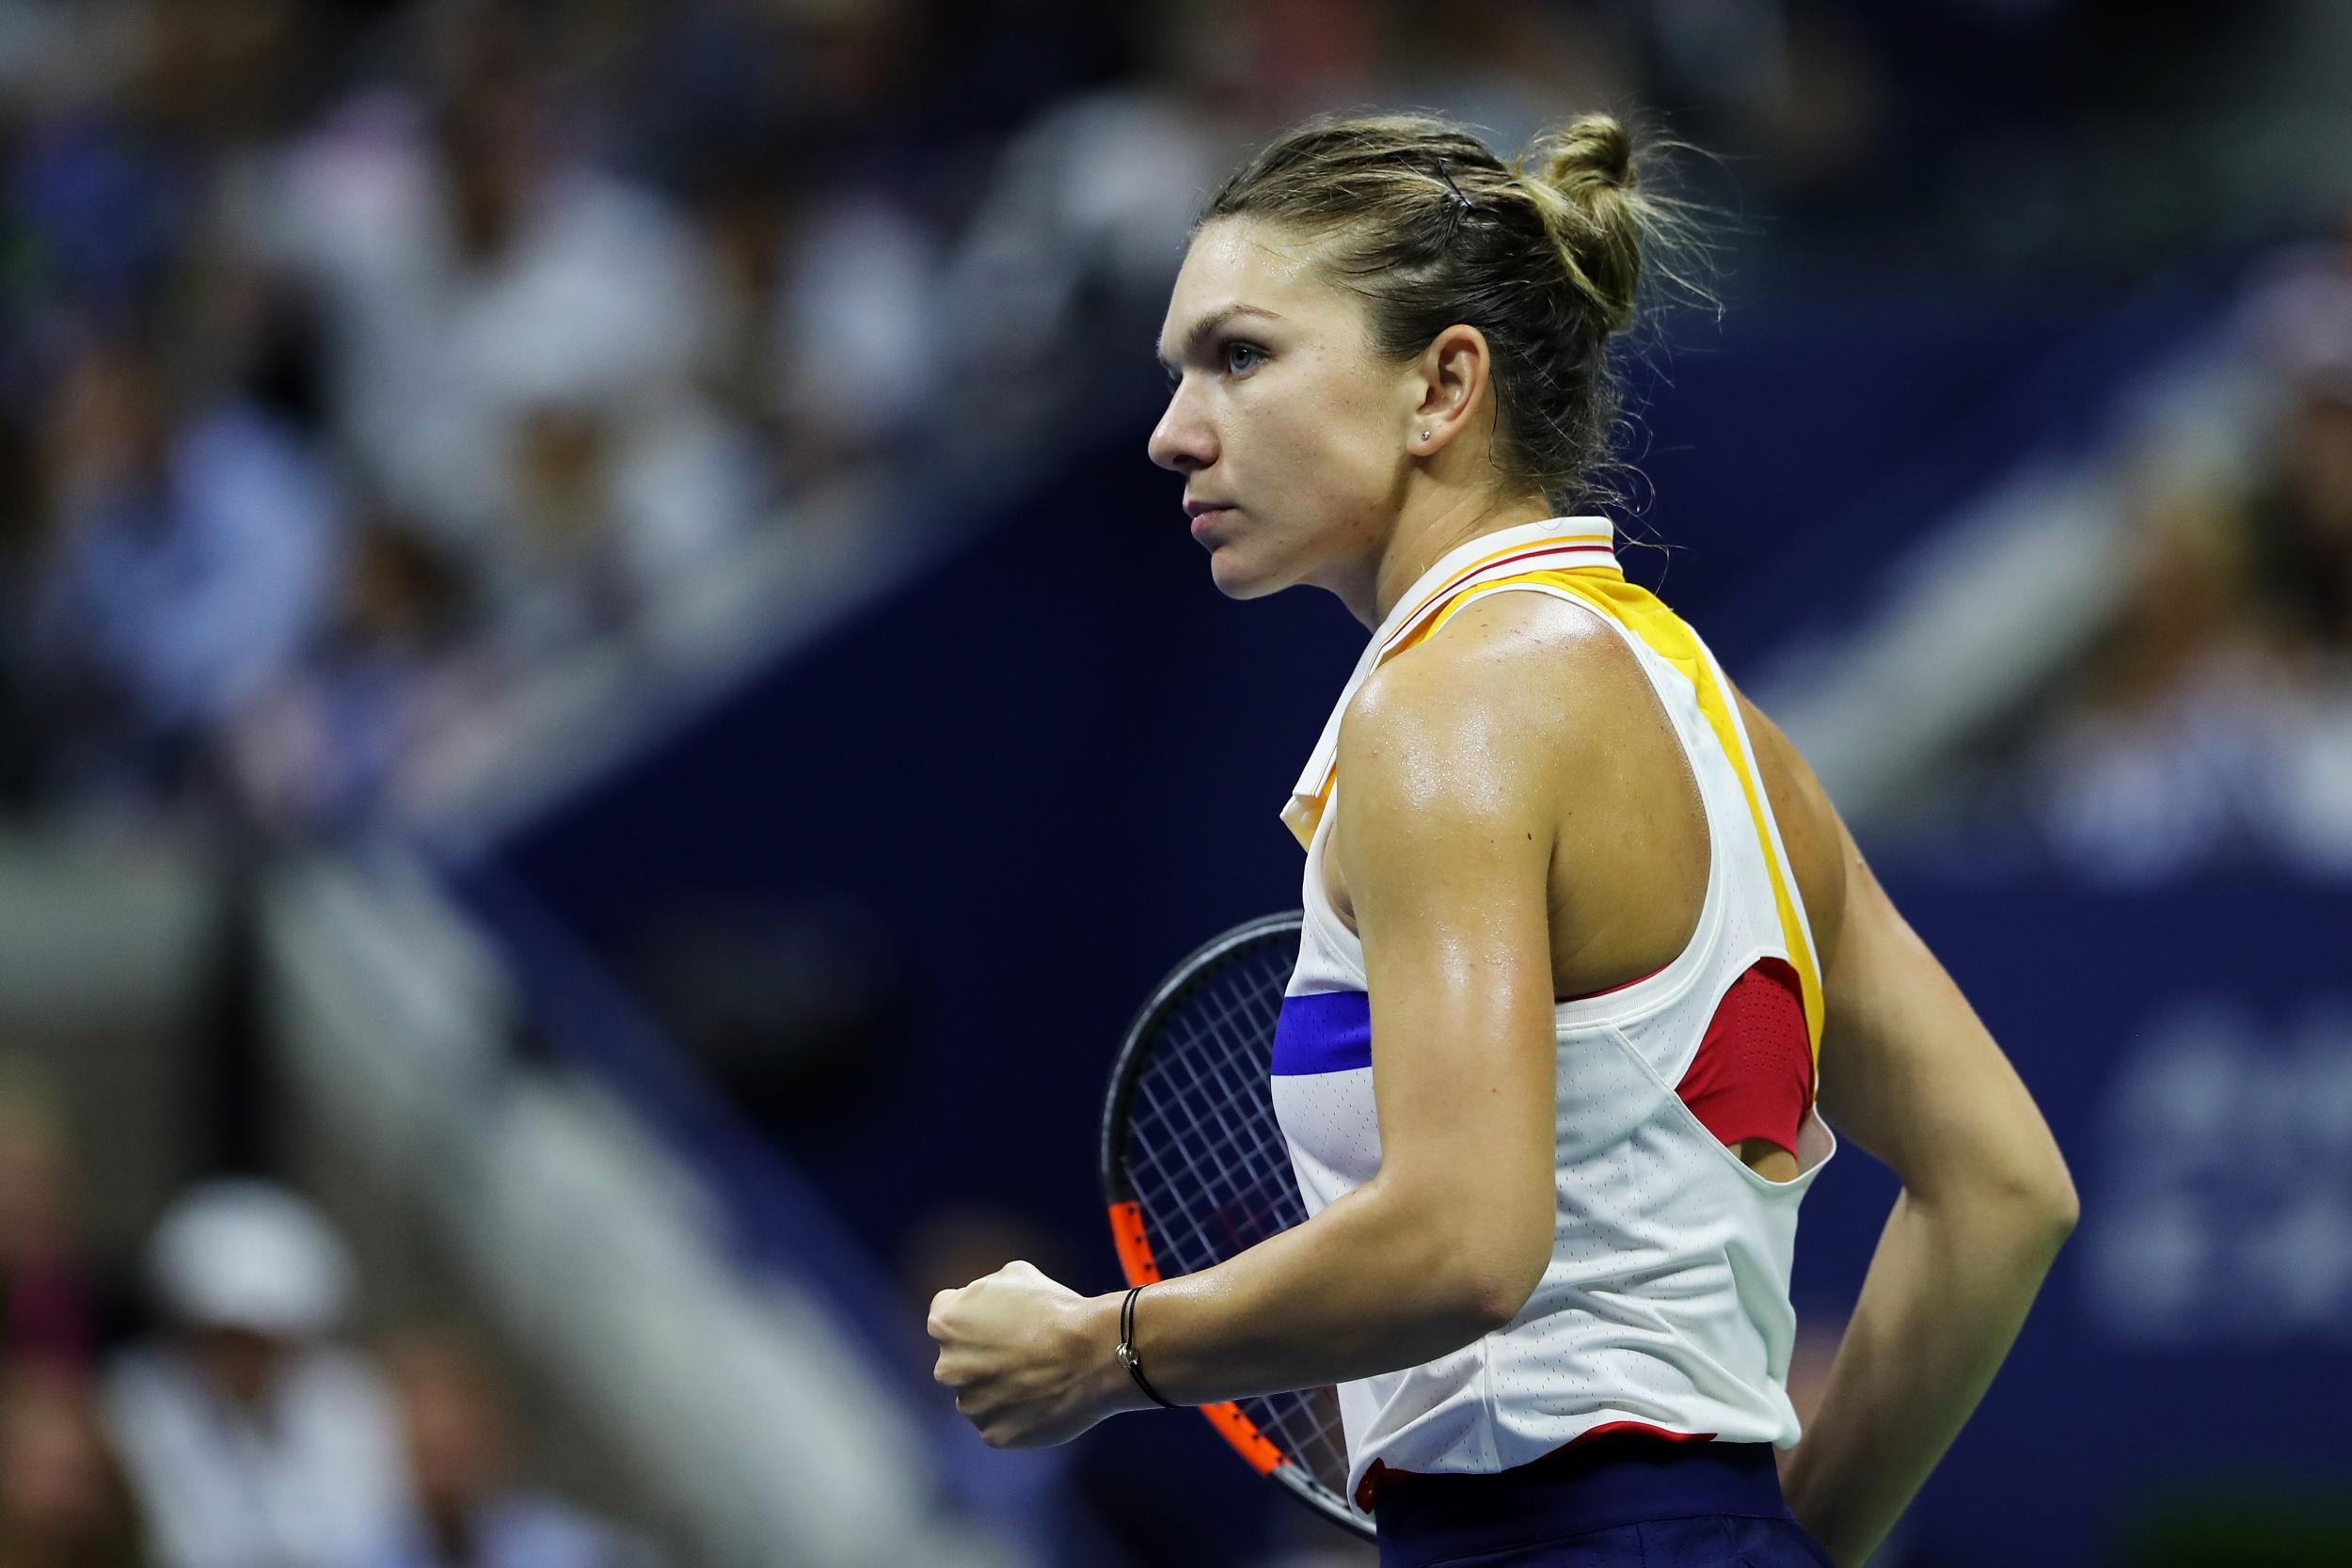 Simona Halep crashed out of the US Open with defeat to Maria Sharapova on Monday